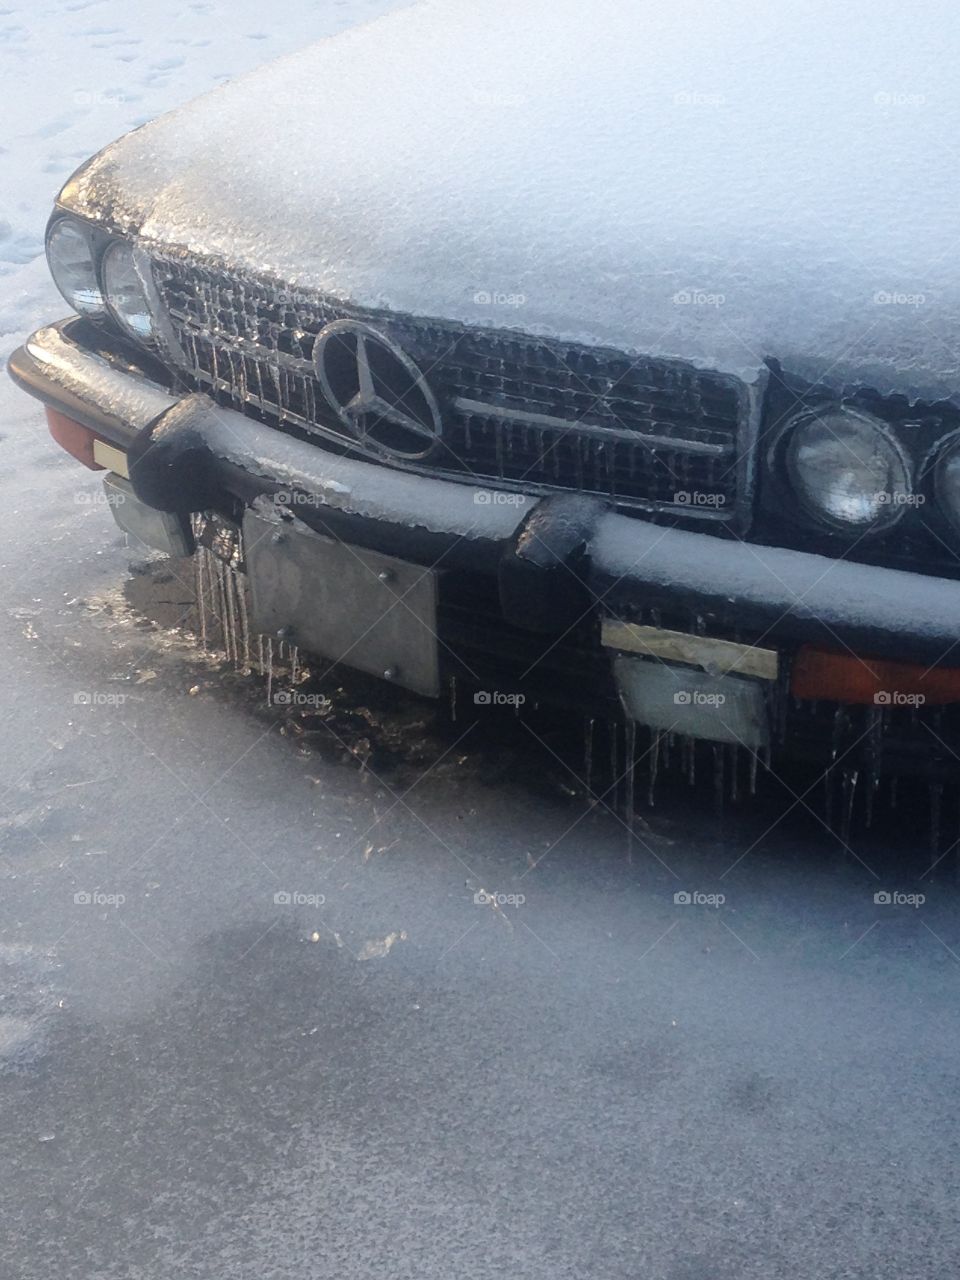 Snow and ice on 1979 Mercedes Benz